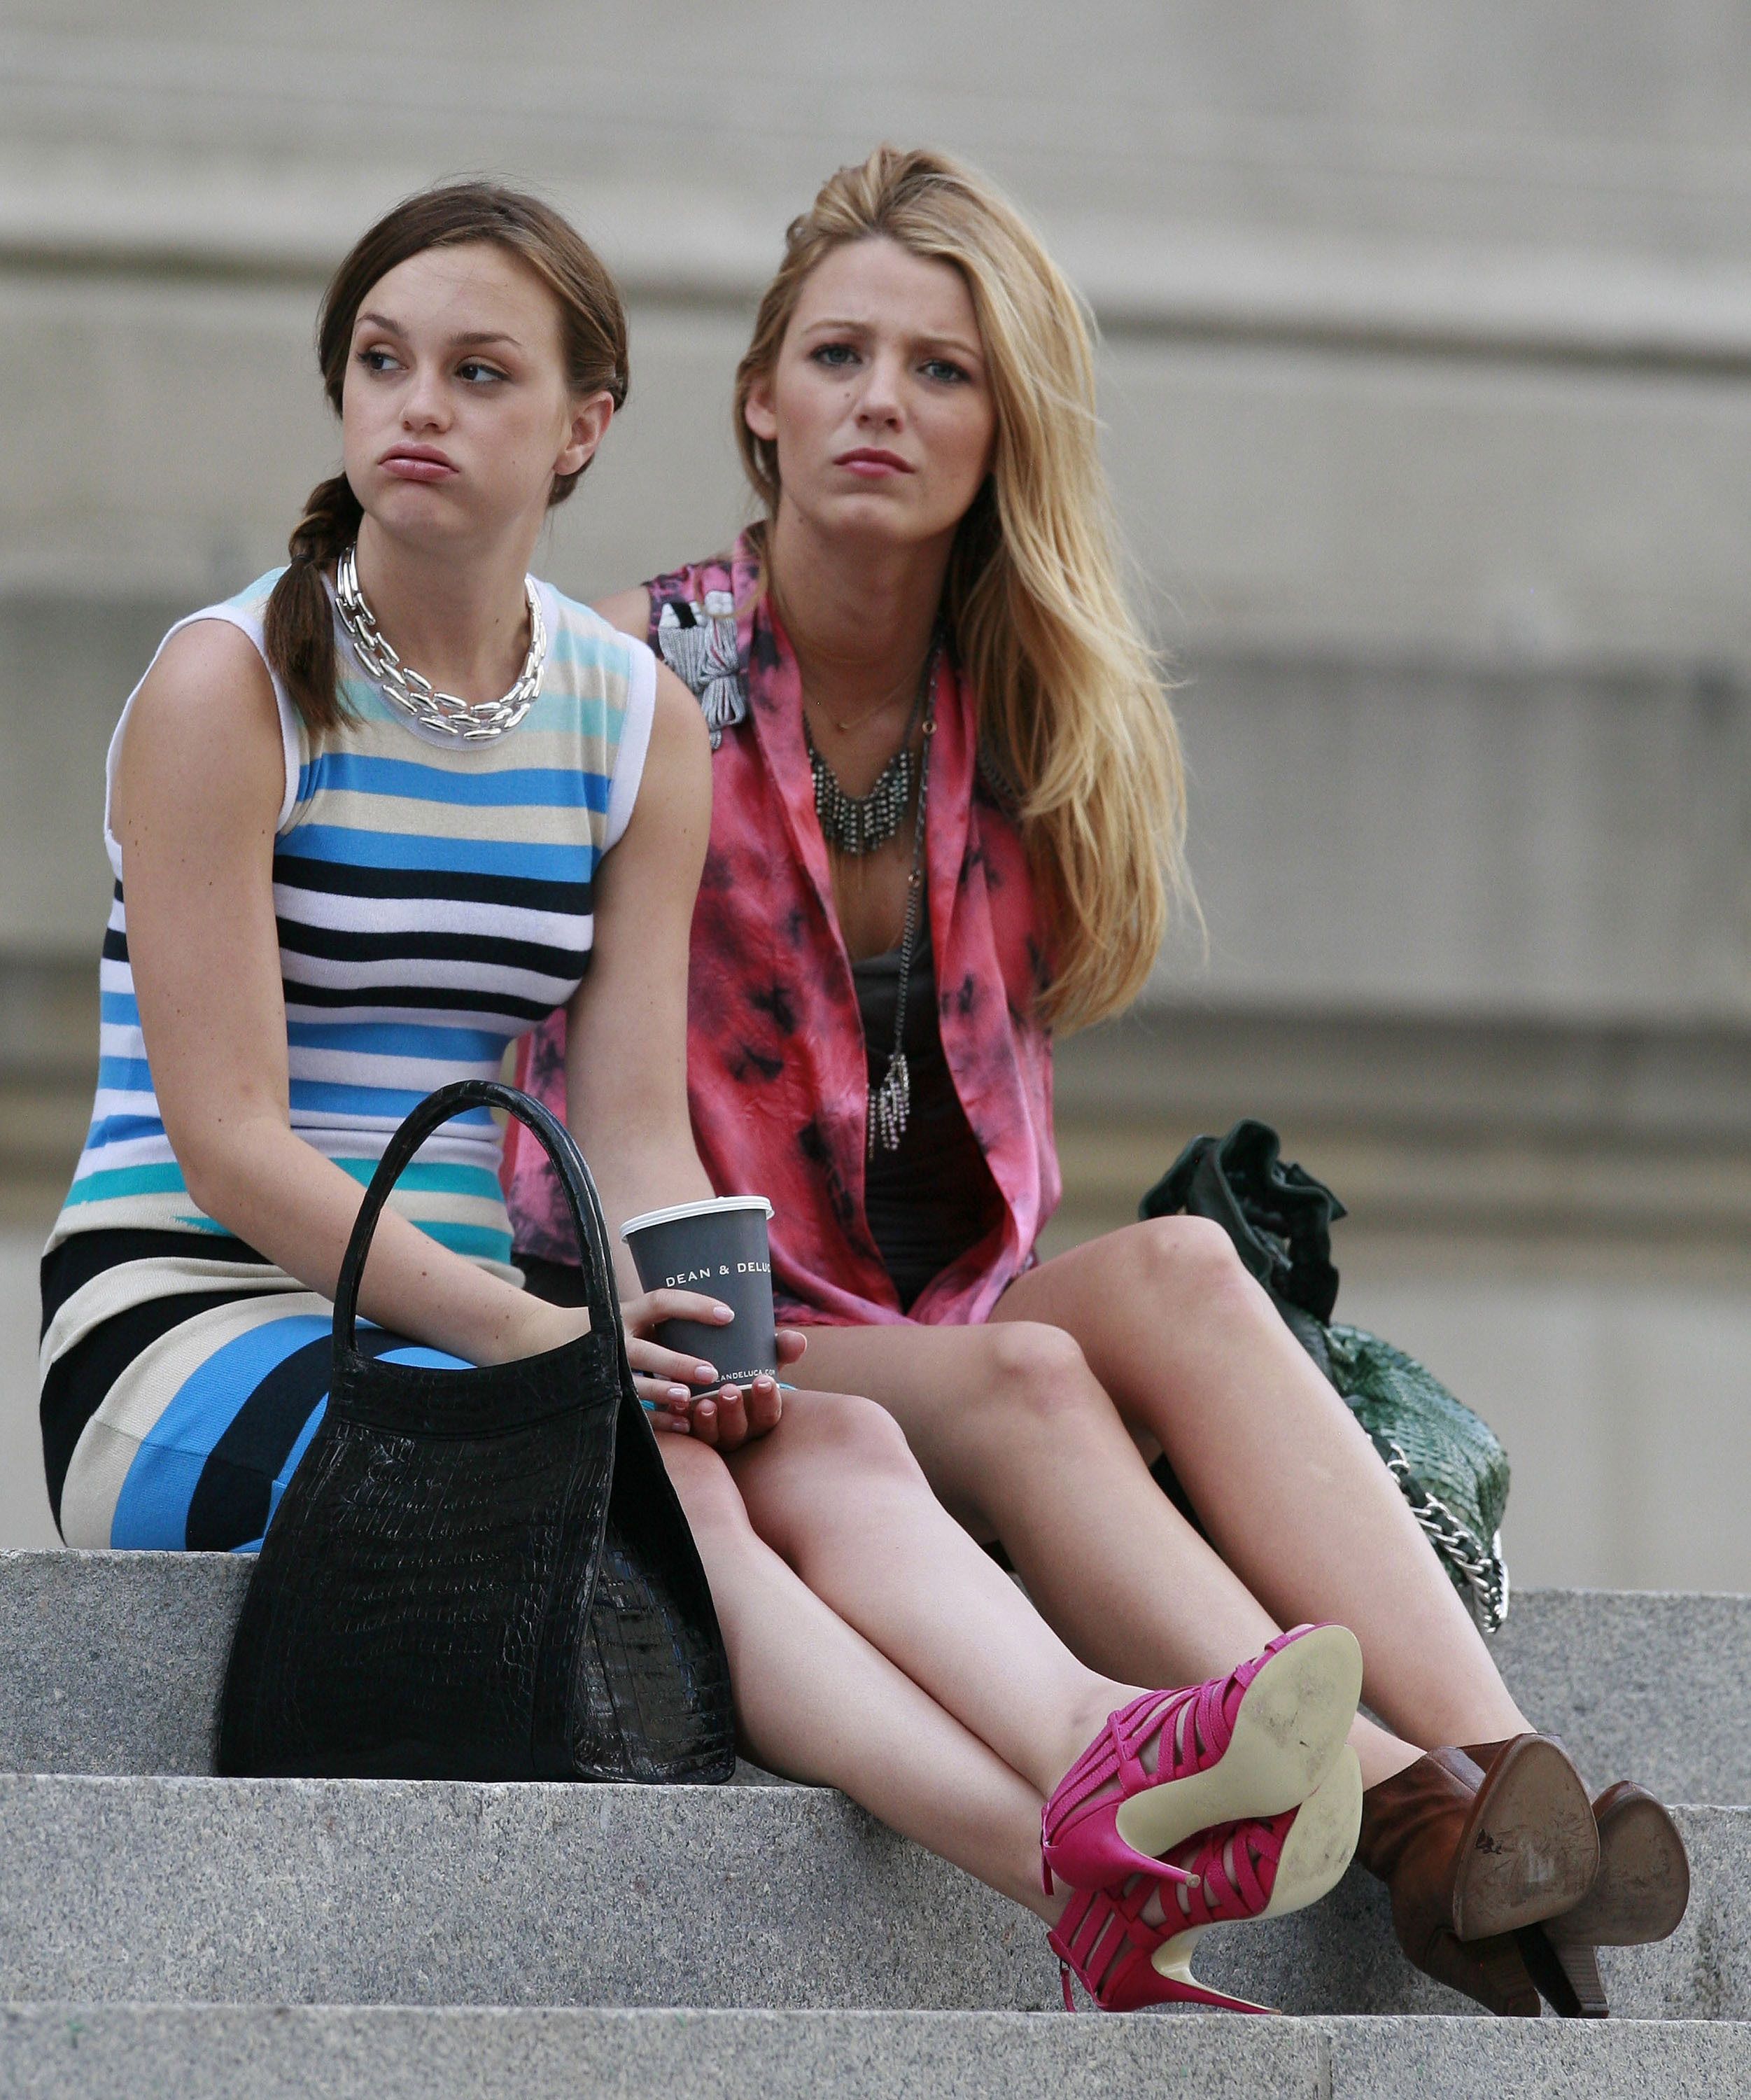 gossip girl: 'Gossip Girl' OTT release date: When and where to watch - The  Economic Times